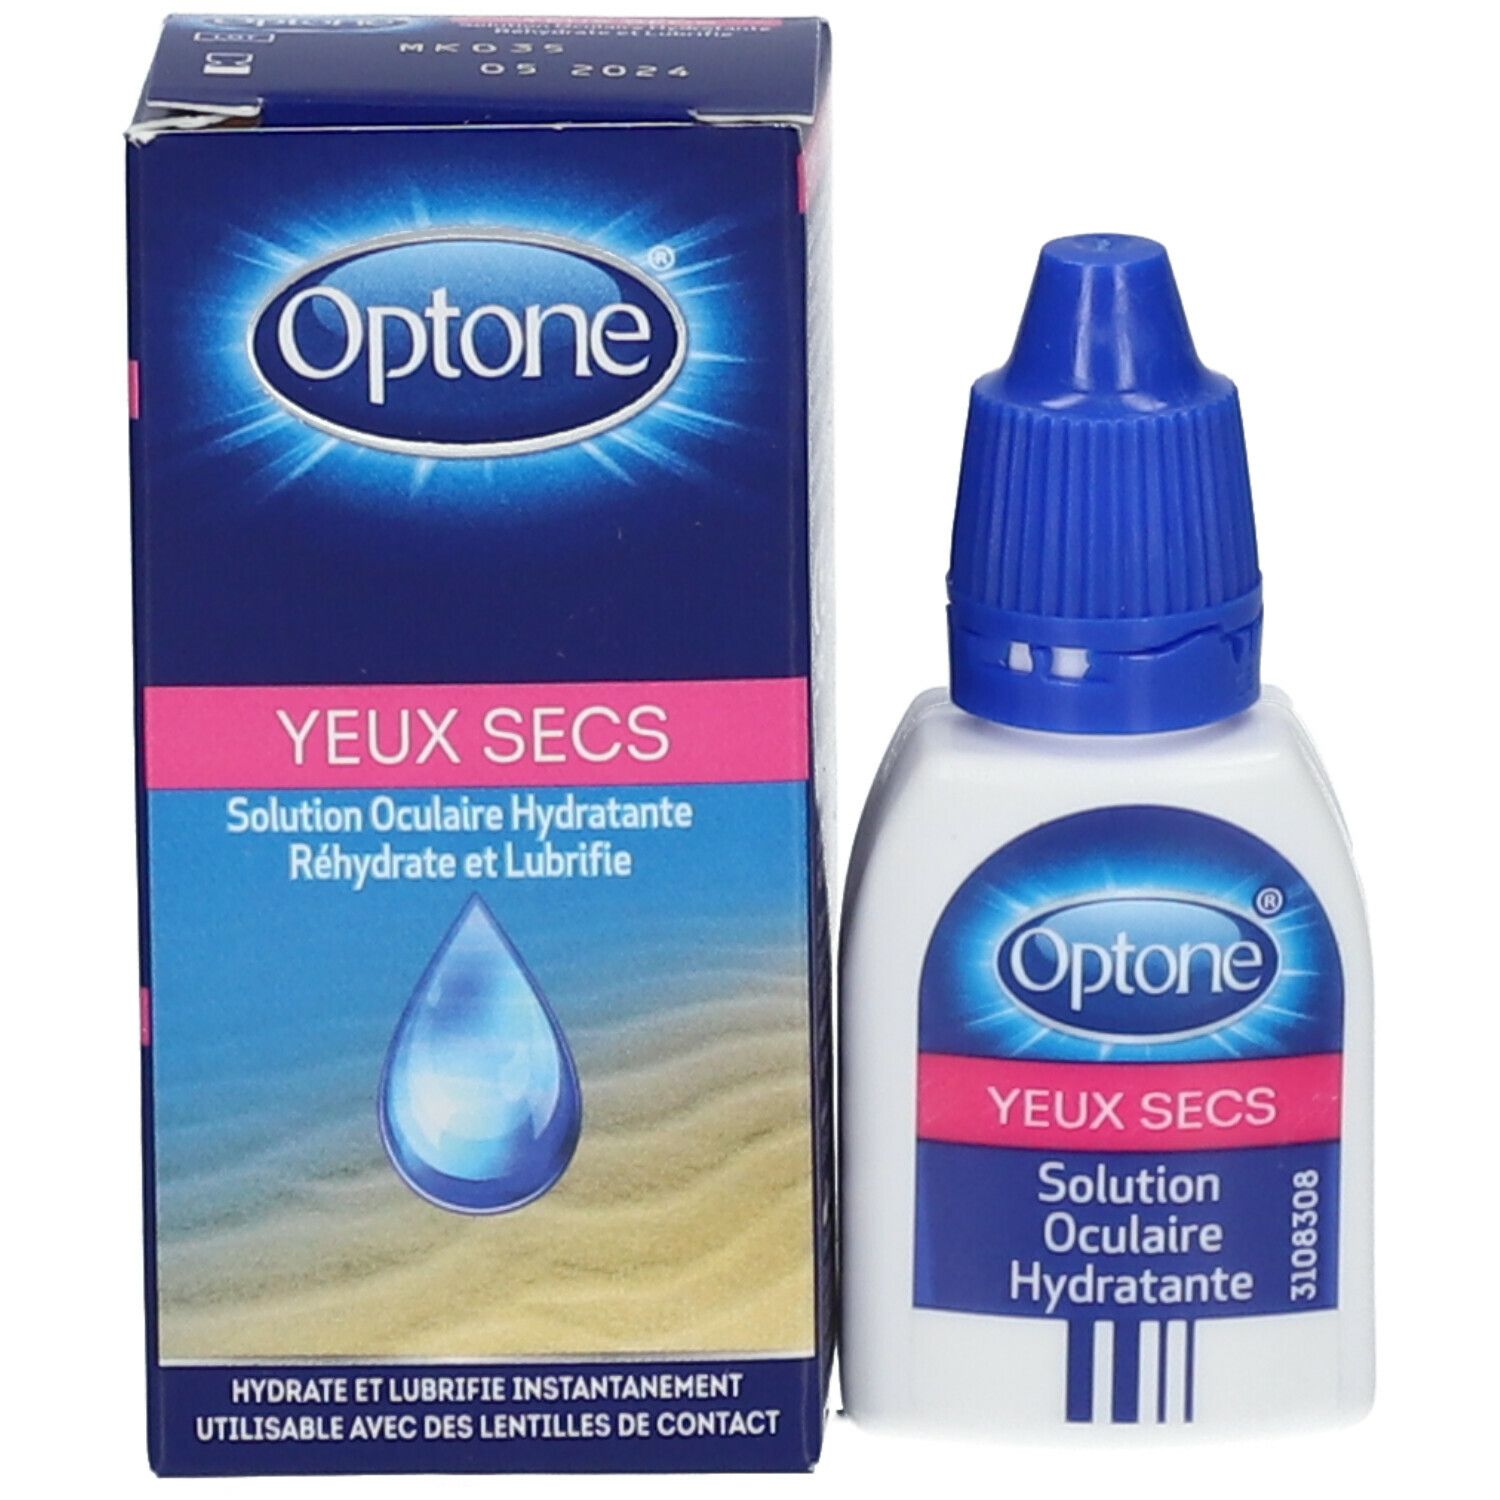 Optone solution oculaire hydratante yeux secs